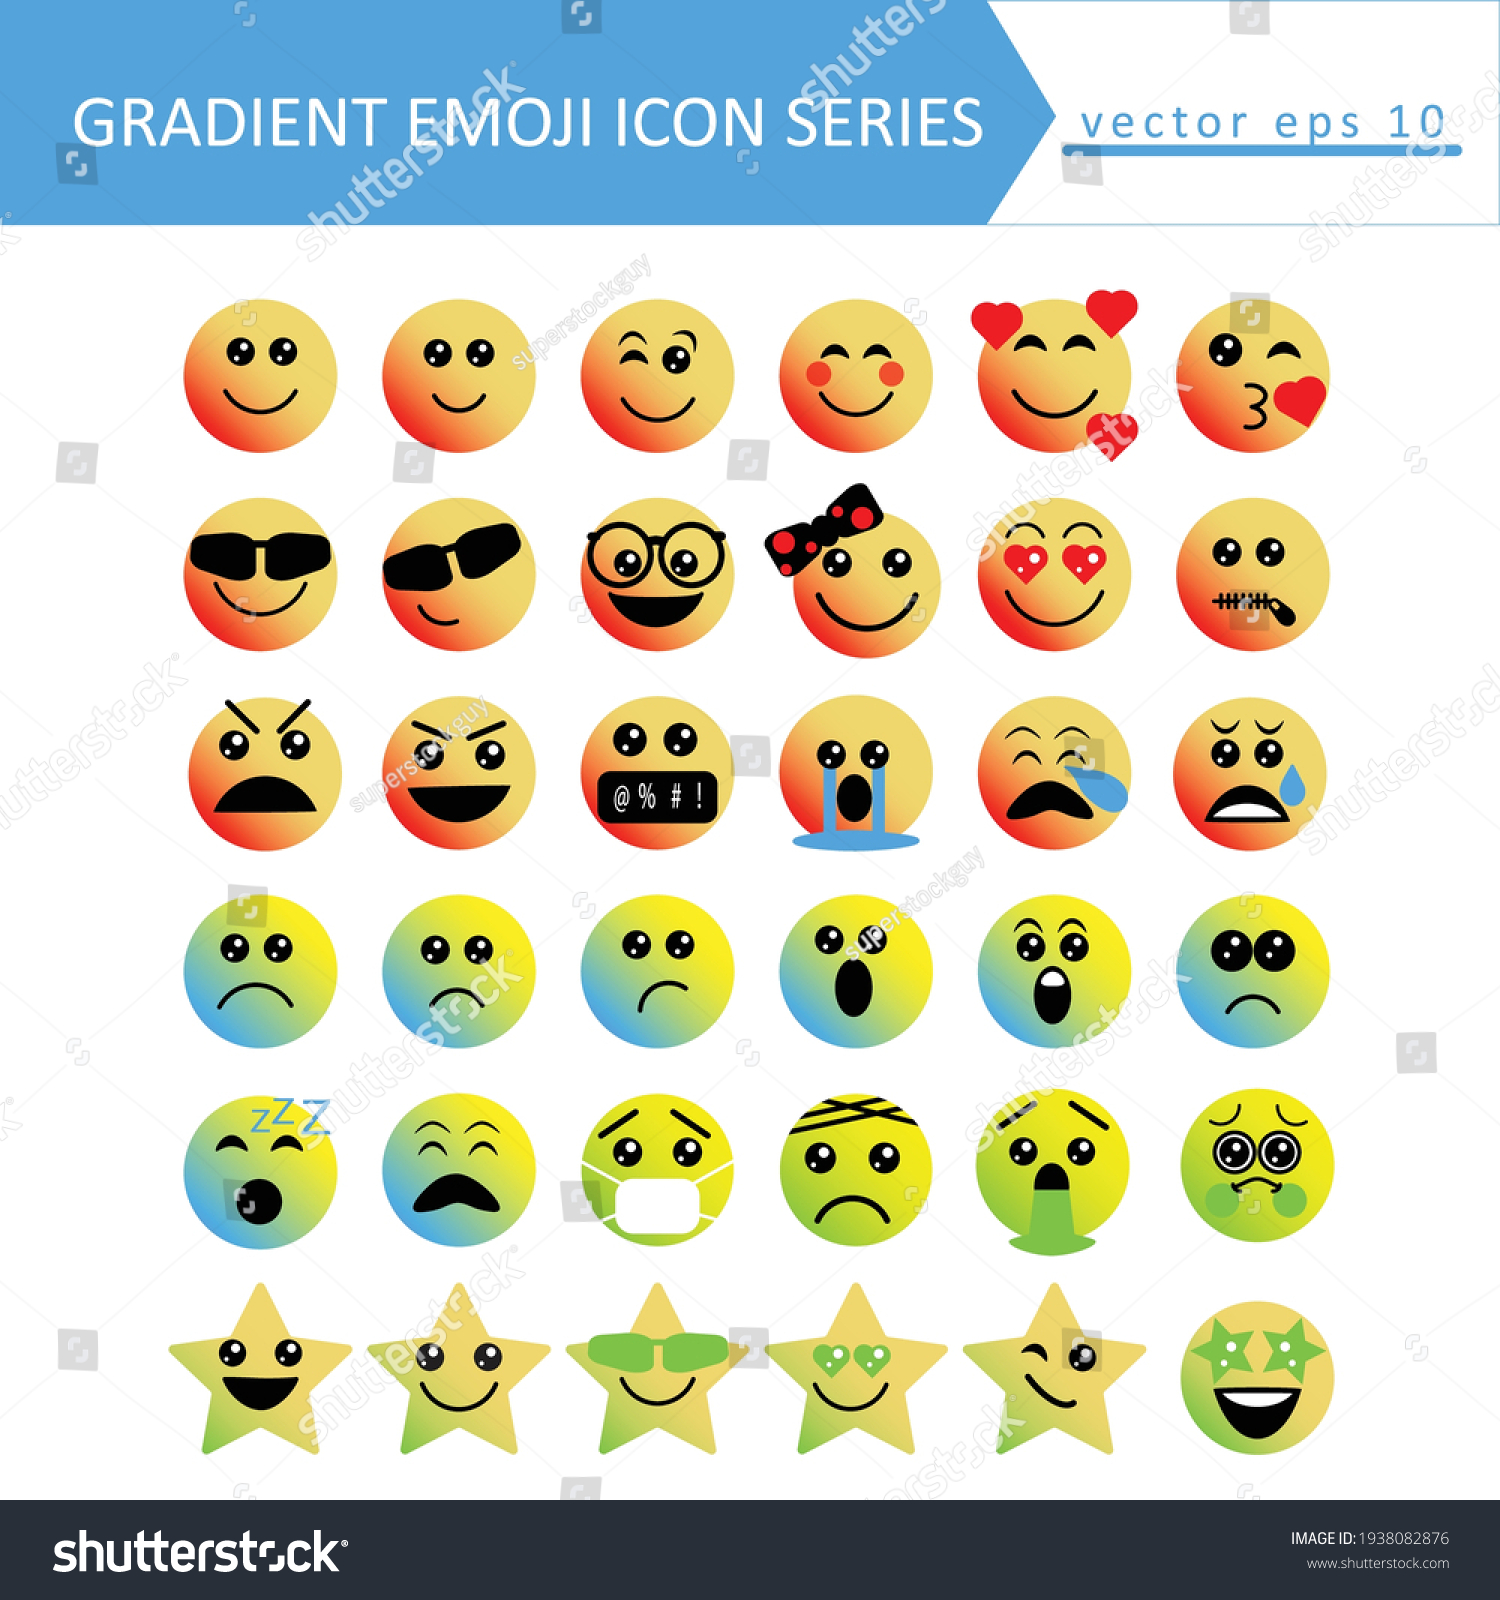 SVG of Cute social media gradient emoji set on white background. Fully editable and royalty free. svg